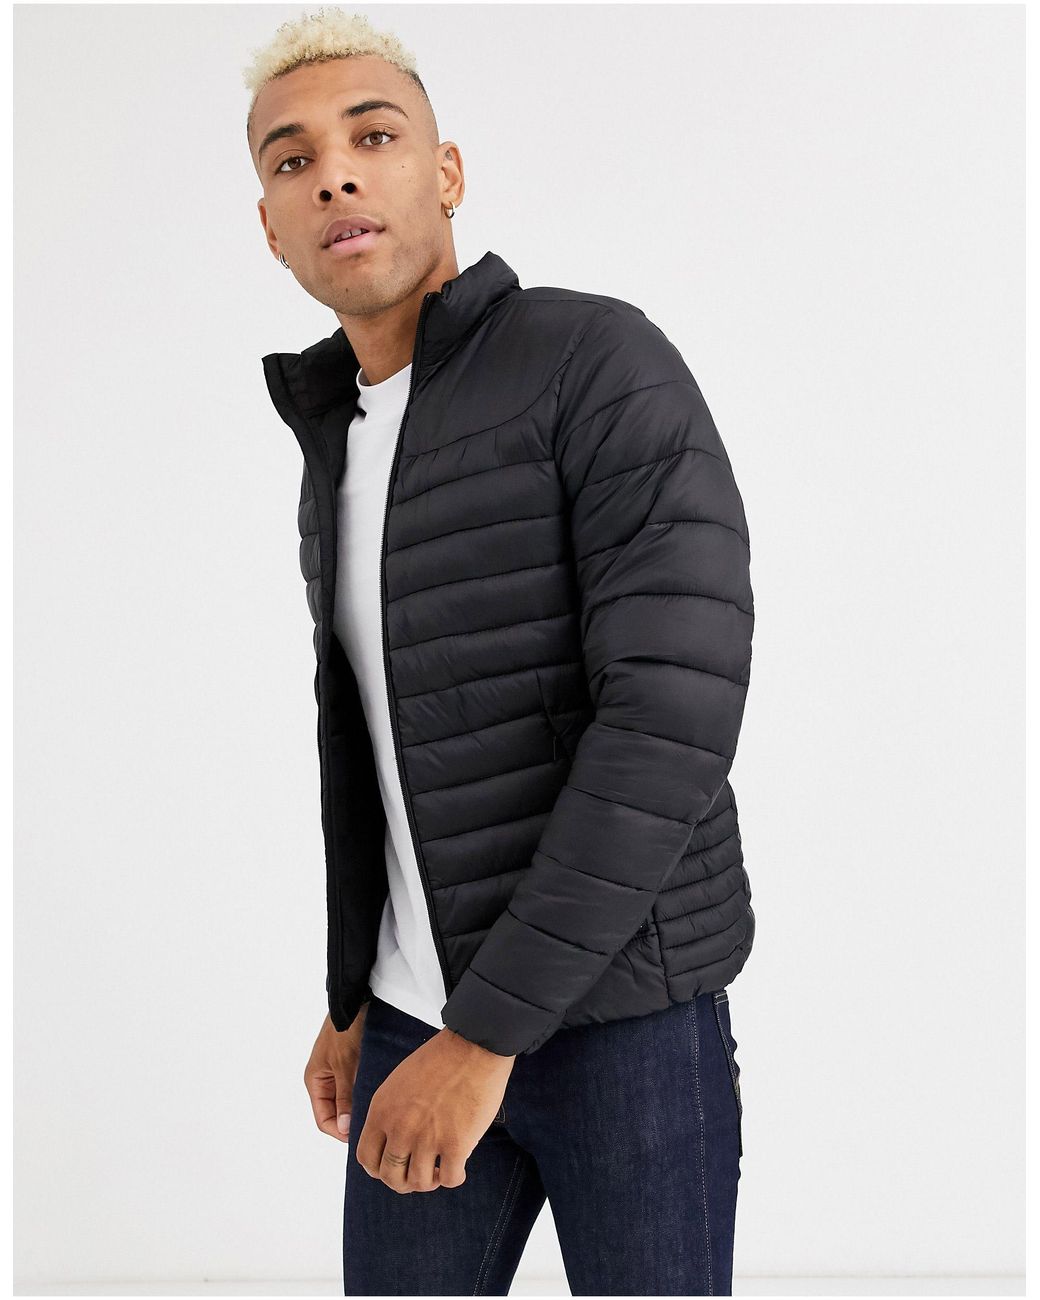 Pull&Bear Synthetic Join Life Light Puffer Jacket in Black (Green) for 